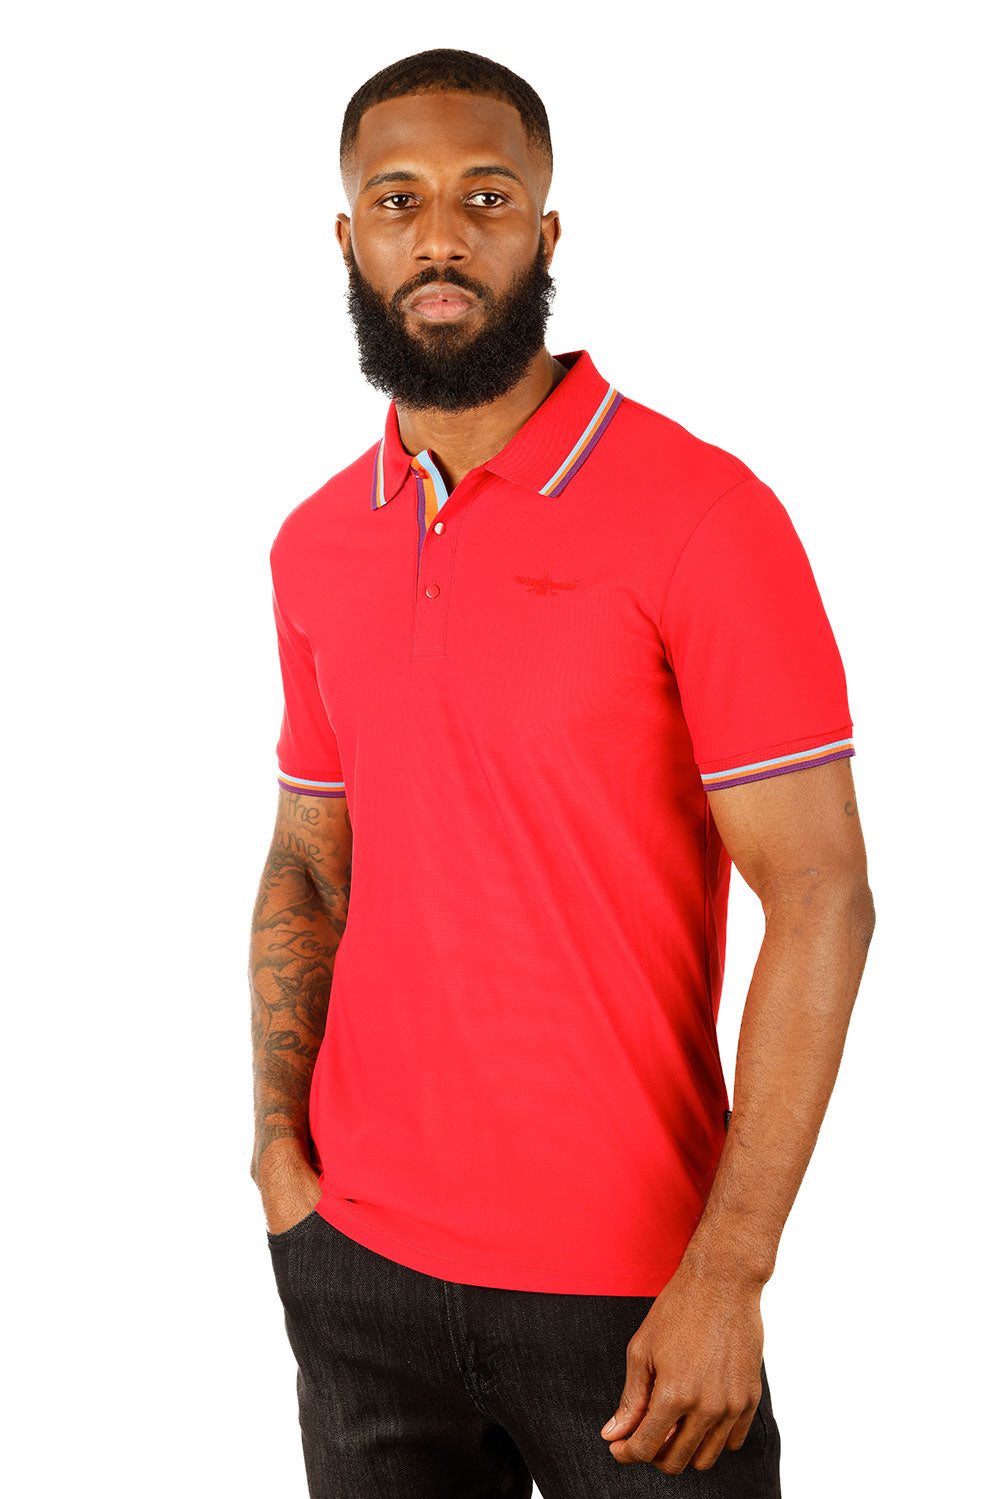 Barabas Men's Solid Color Linear Collar and Cuff Polo Shirts 3PS127 Red